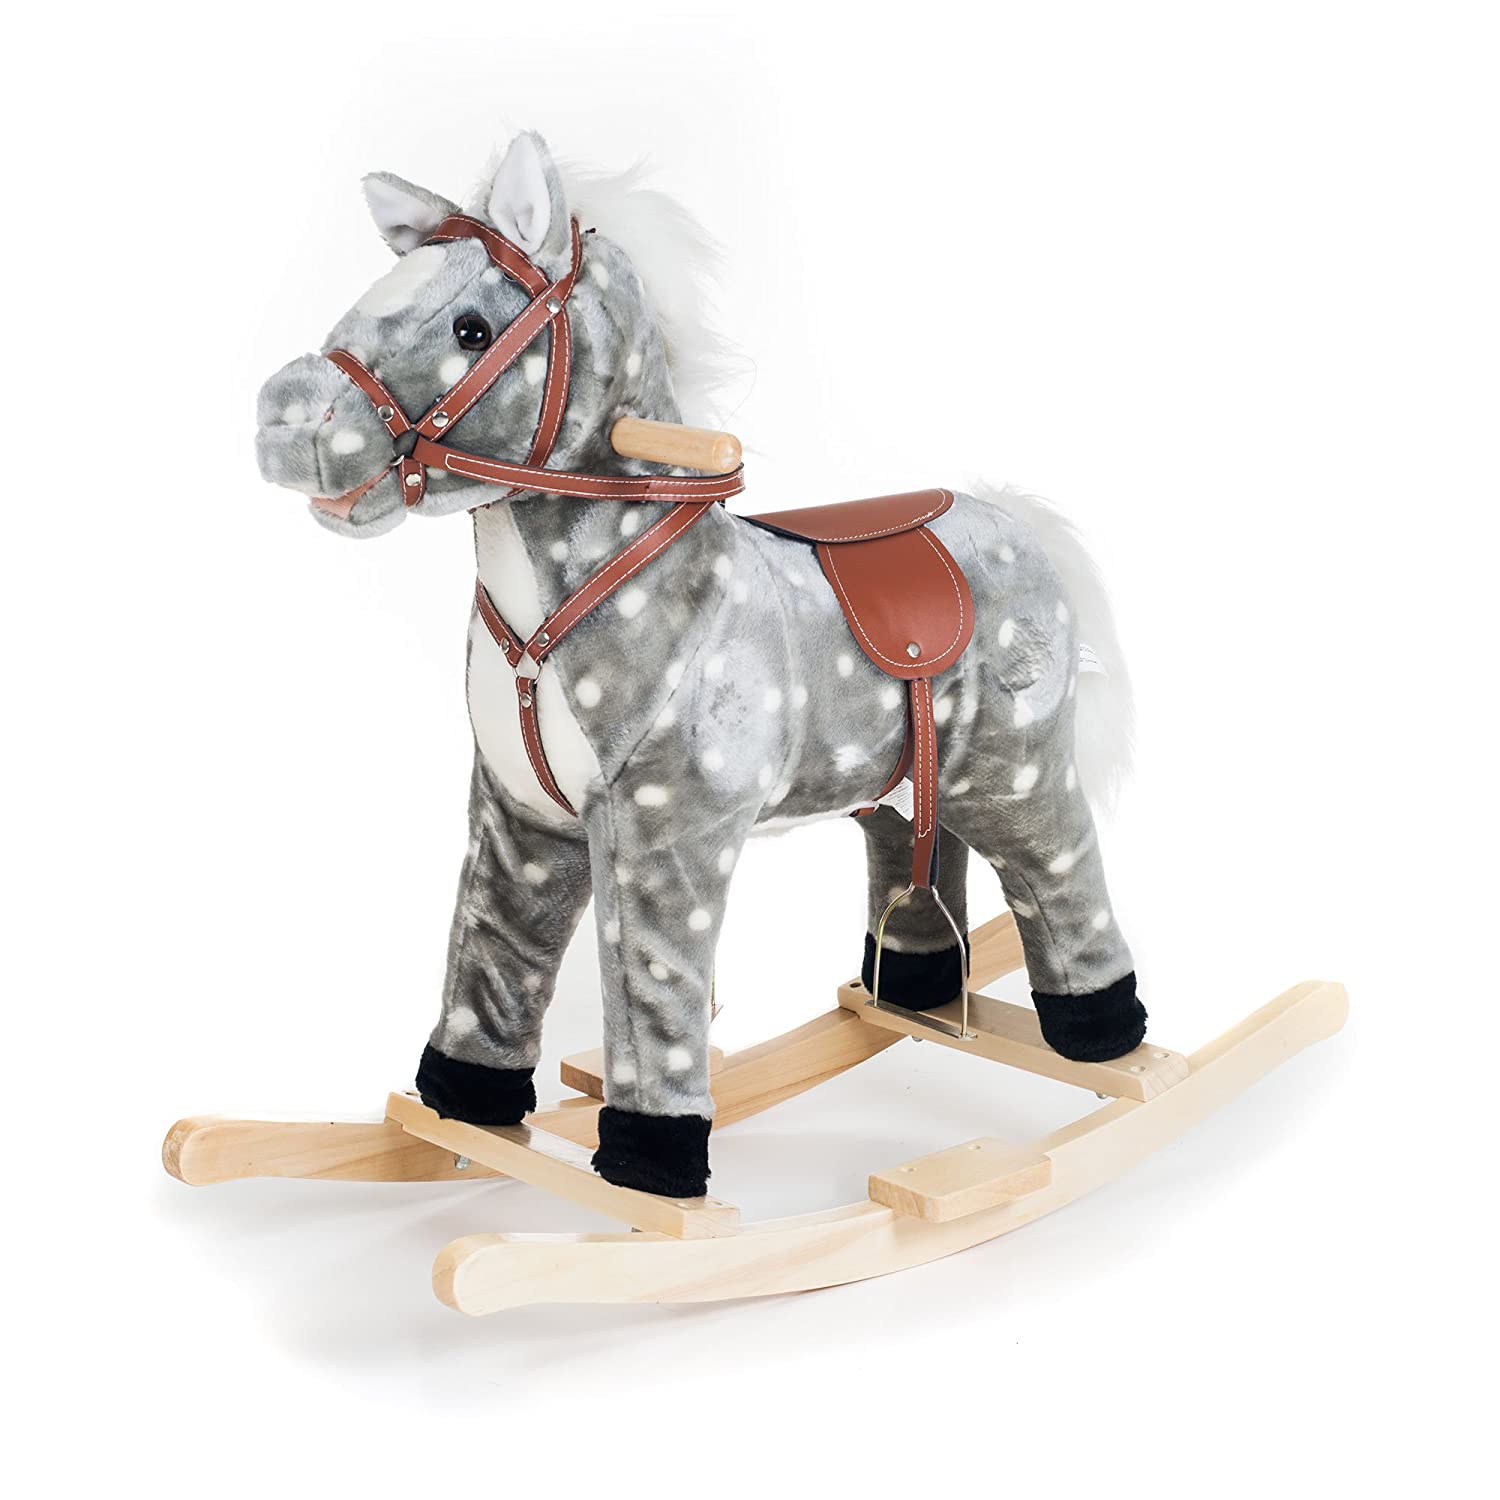 Top 9 Best Rocking Horses Toy Reviews in 2022 7